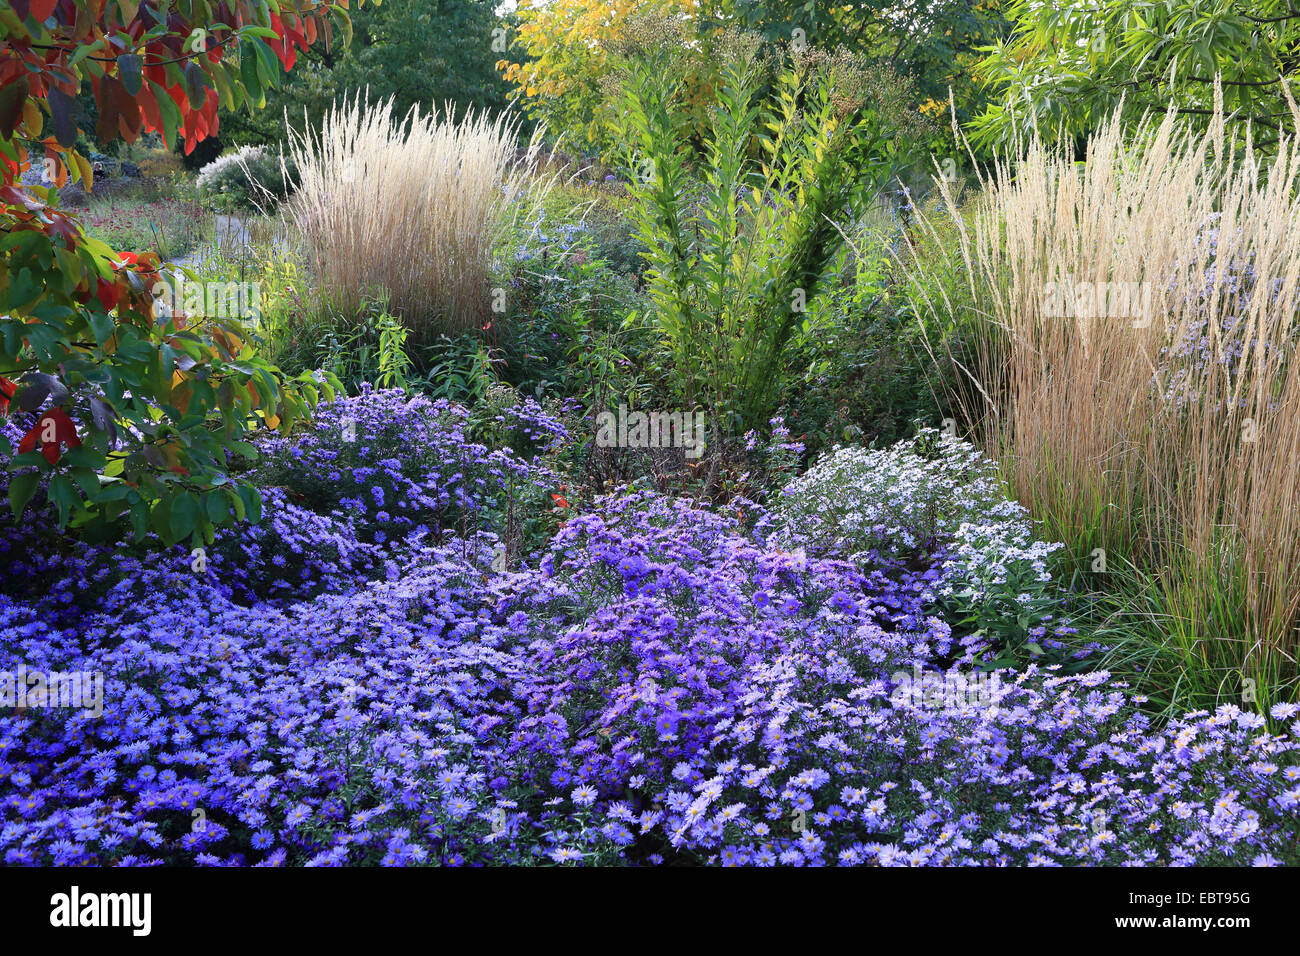 garden in autum with asters and grasses, Germany Stock Photo